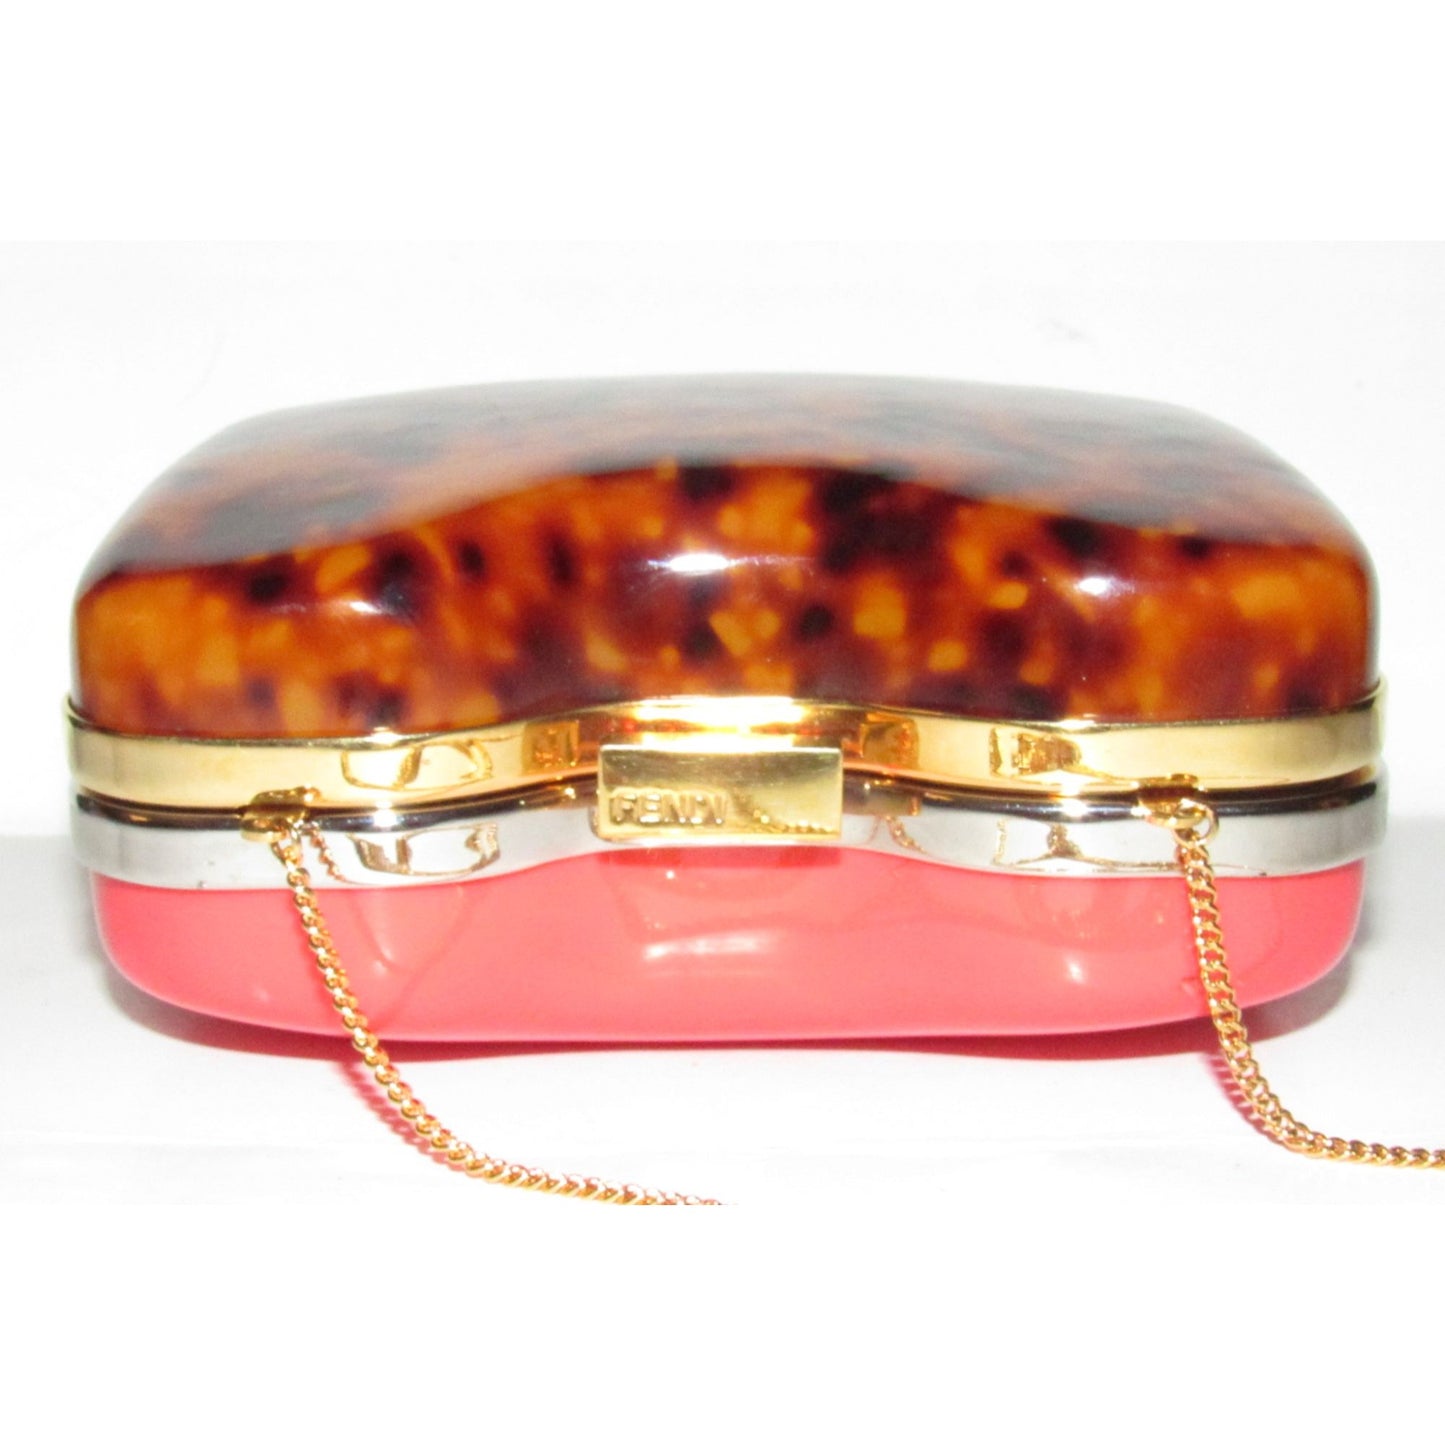 Retro, Fendi two way- clutch or cross body/shoulder clam shell style purse made of red & tortoise shell Lucite with a gold chain strap